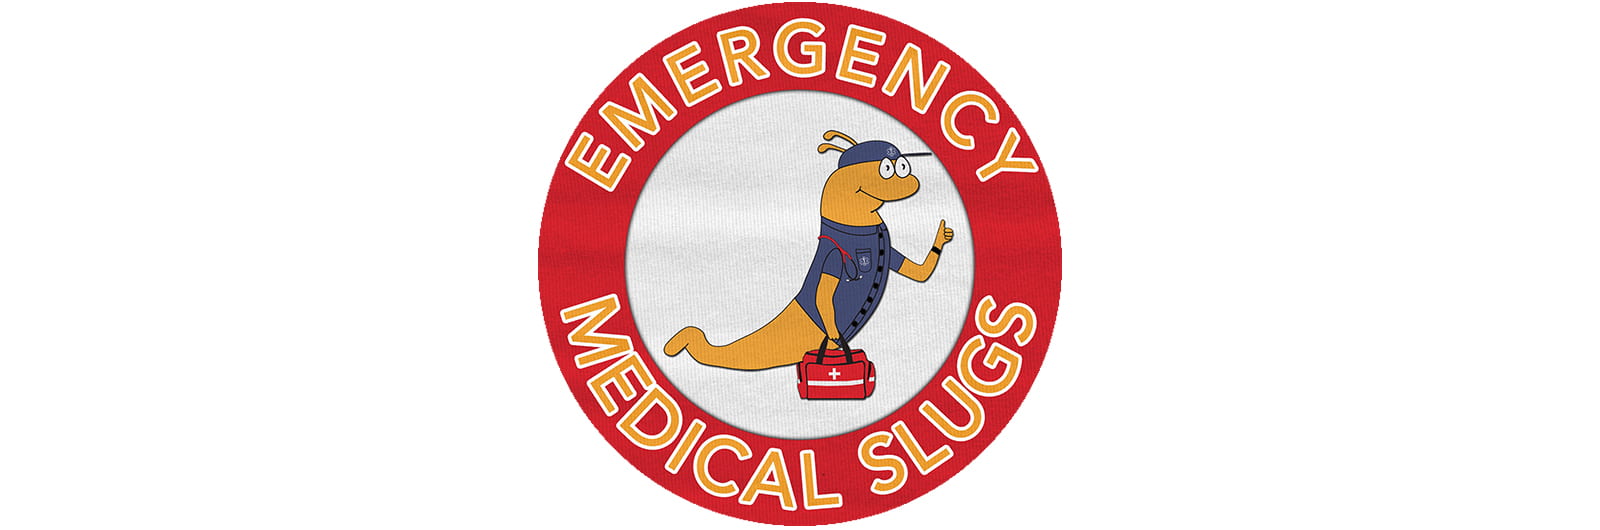 A drawing of a banana slug dressed as an EMT with text that reads "Emergency Medical Slugs"